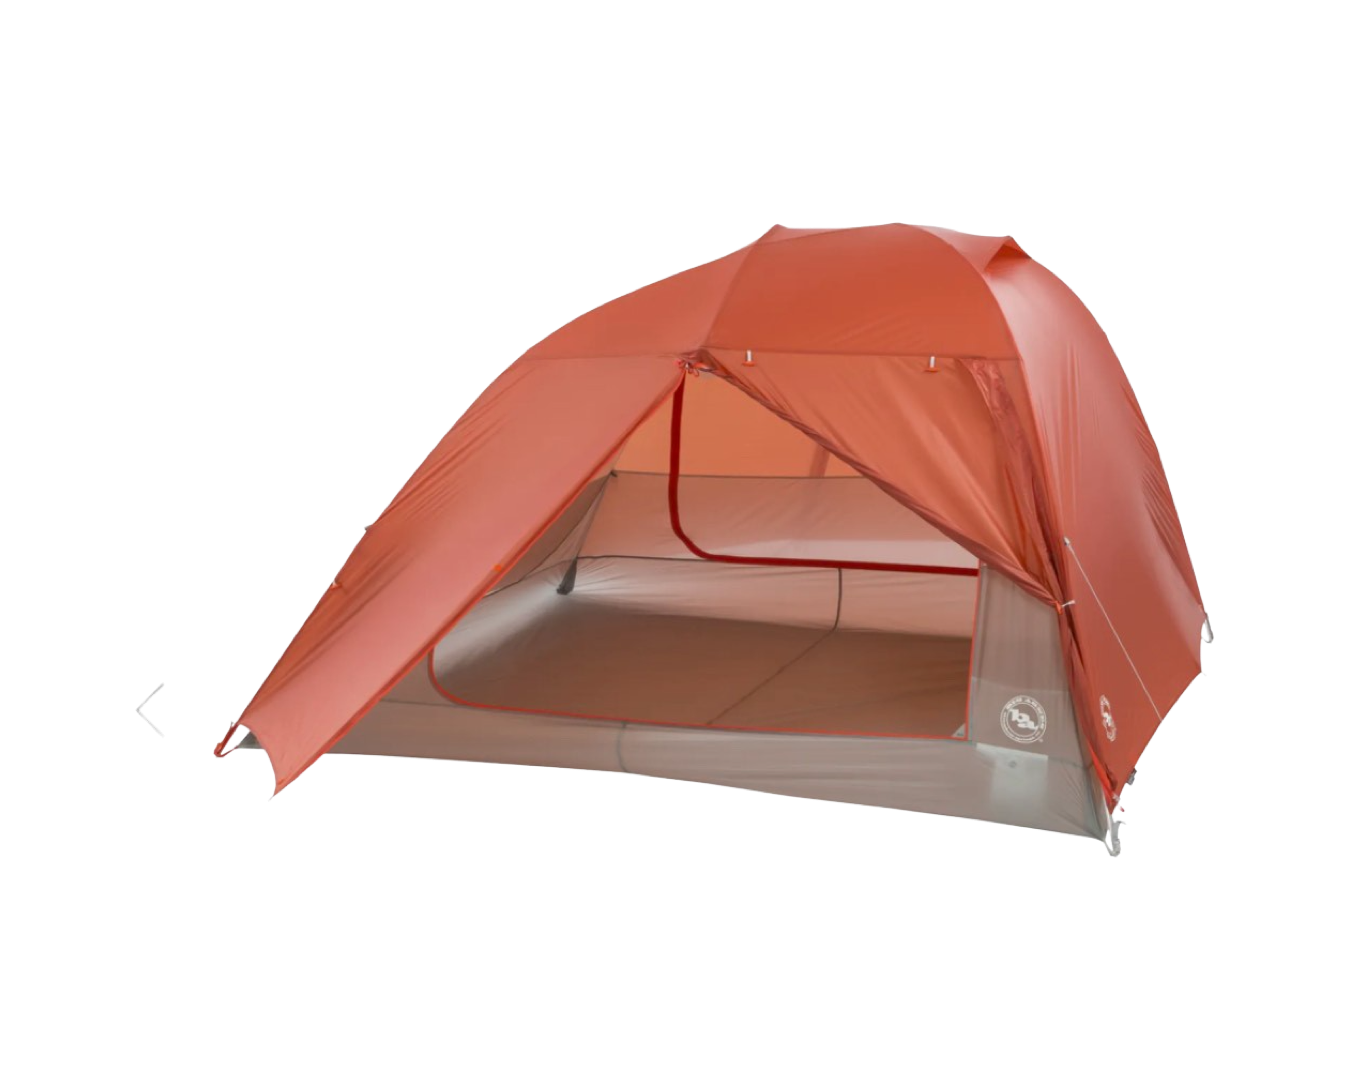 Best 4 Person Backpacking Tents